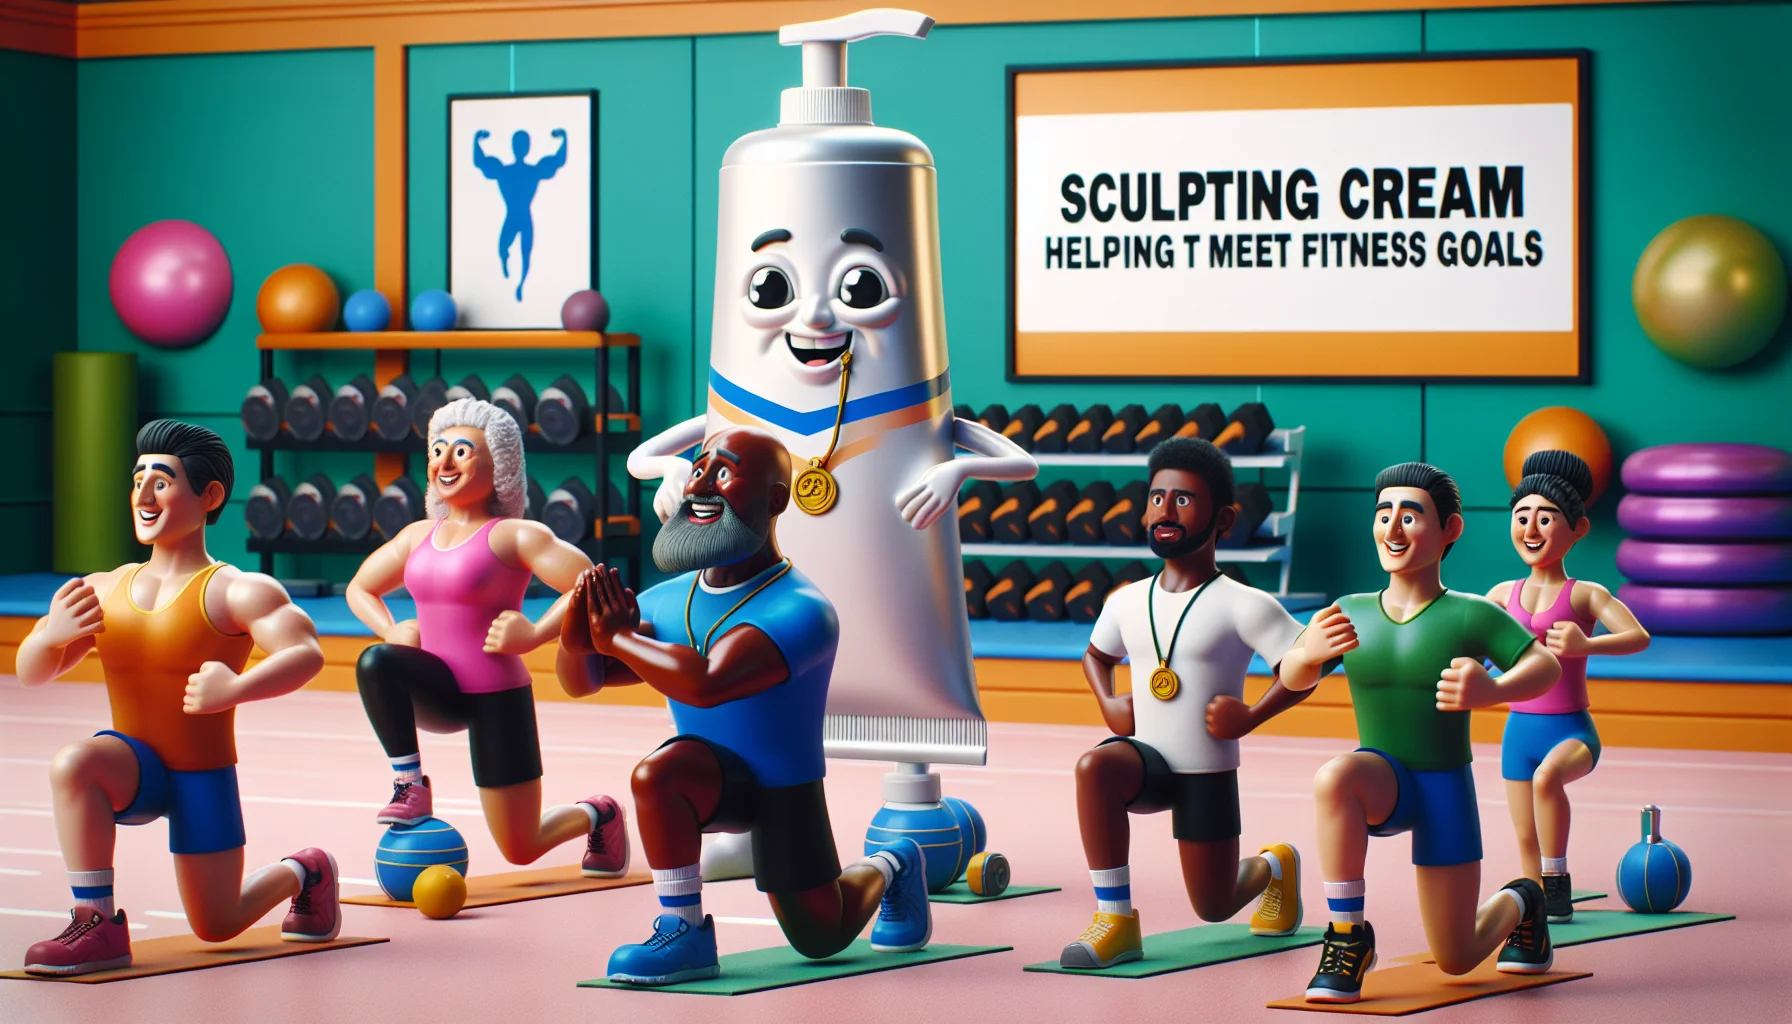 Create a humorous and enticing scene set in a fitness centre. In this centre, imagine a large tub of sculpting cream has taken animated form, with lively eyes and a bright smile. It's wearing a coach's whistle around its neck and demonstrating exercises to a diverse group of people. A Hispanic male performs squats with a look of determination on his face, a Caucasian woman is doing jumping jacks, and a Middle-Eastern man is lifting weights, all following the cream's instructions. A hilarious signboard behind them says 'Sculpting cream helping to meet fitness goals'